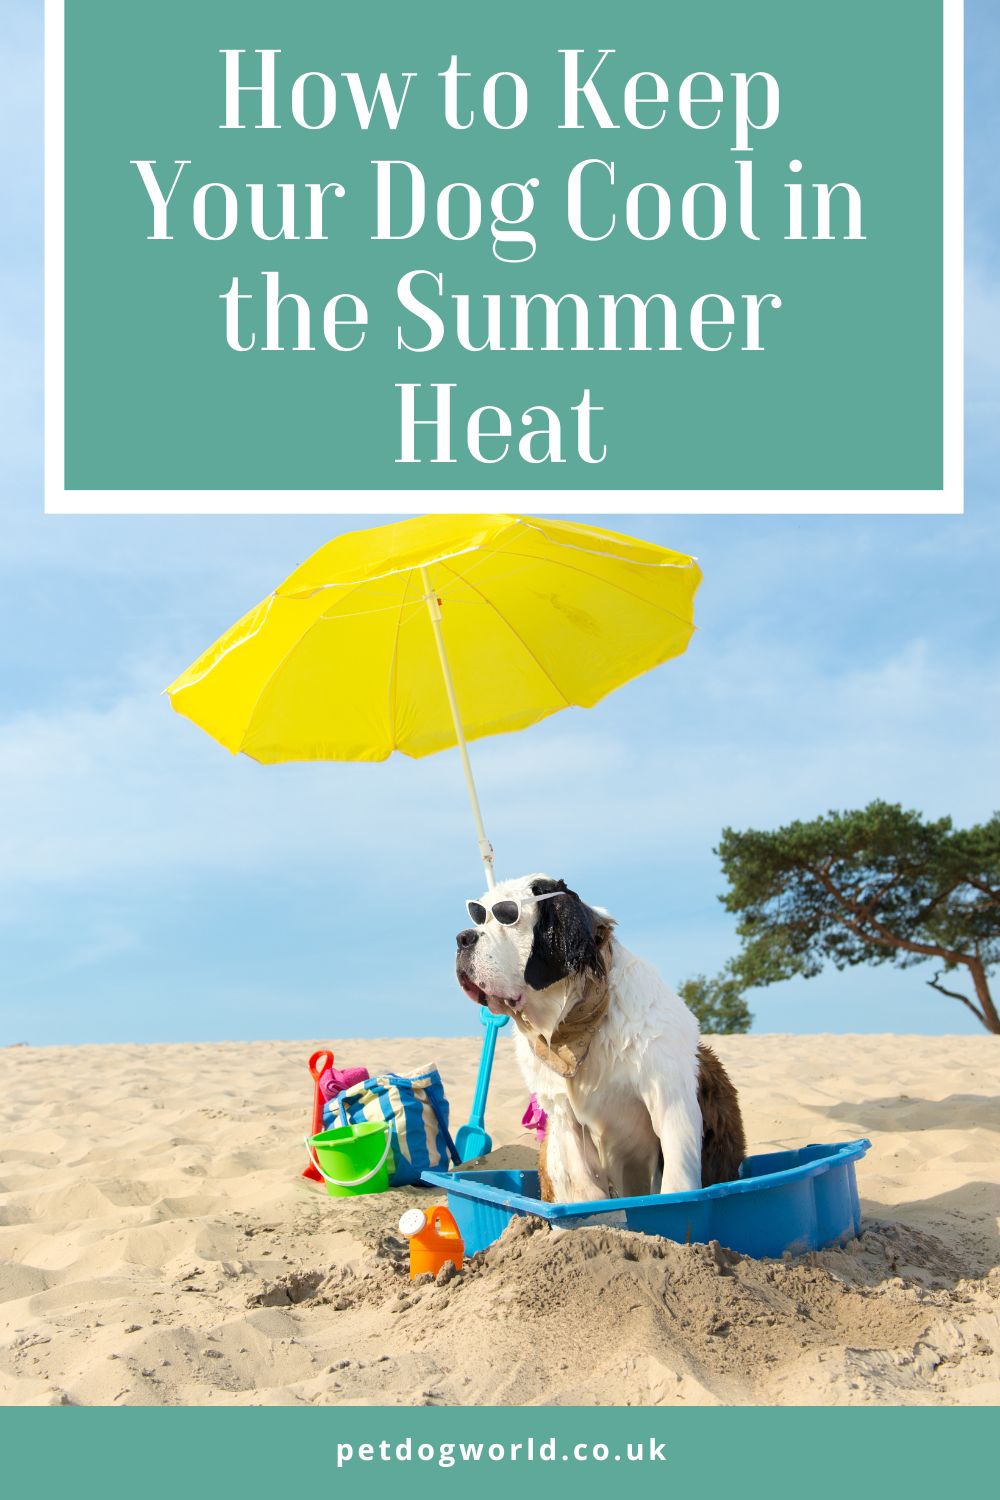 Discover how to keep your dog cool and comfortable in the summer heat. From hydration tips to product recommendations and DIY cooling treats, we've got everything you need to help your furry friend beat the heat!